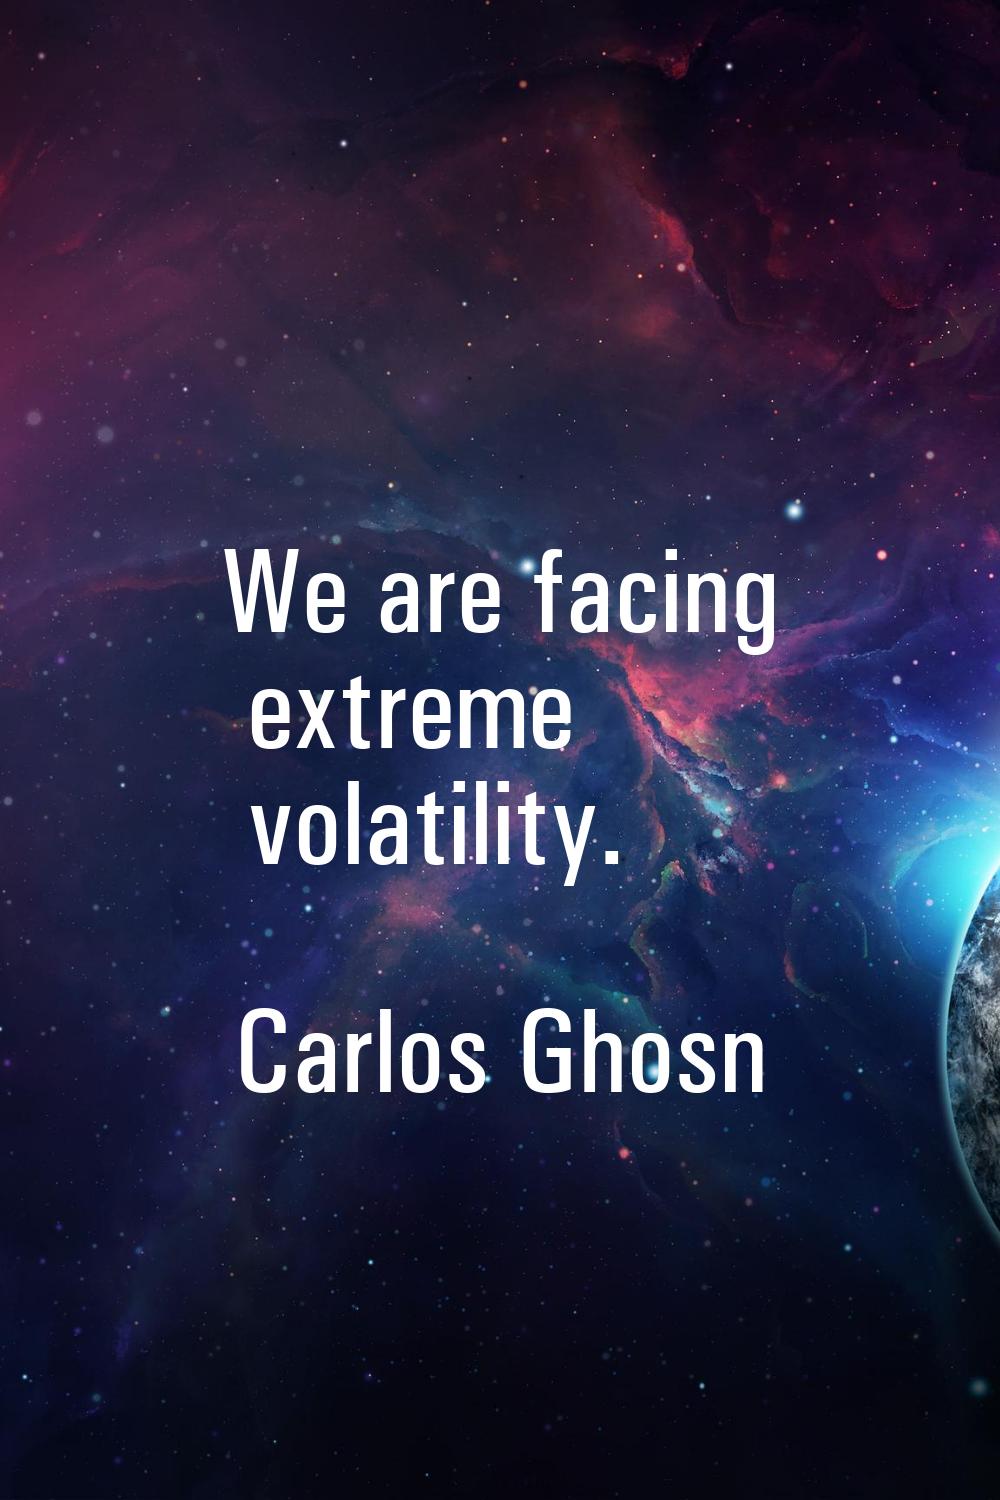 We are facing extreme volatility.